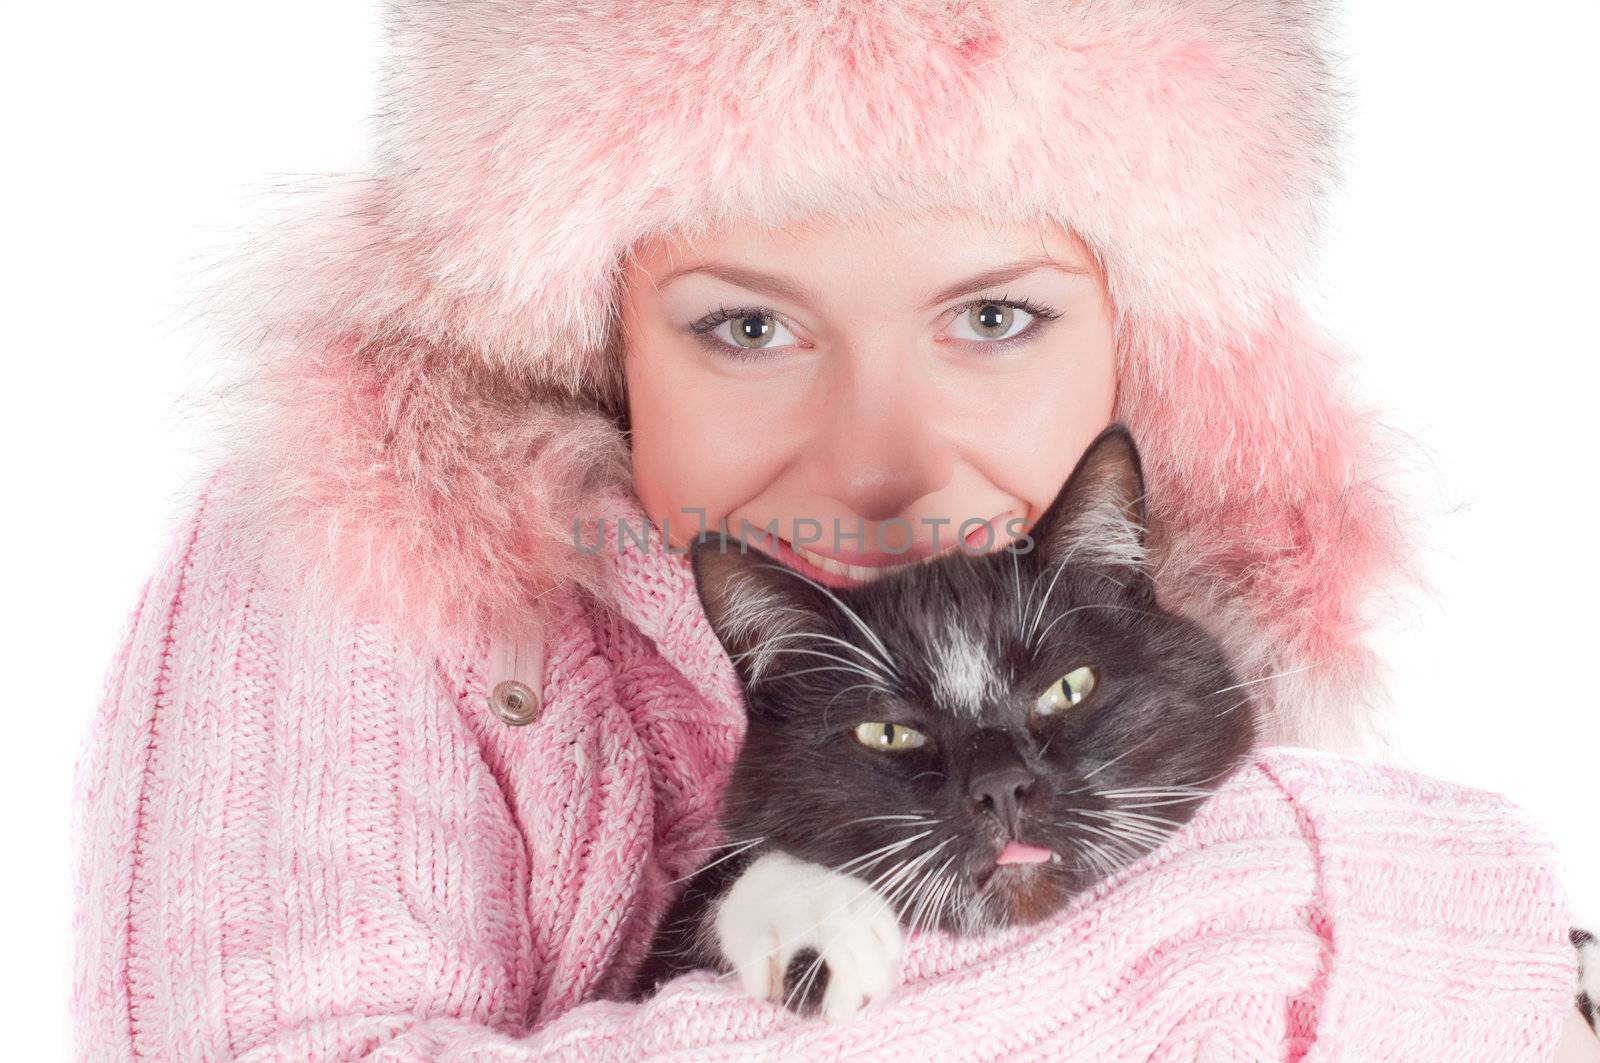 Woman with cat by anytka